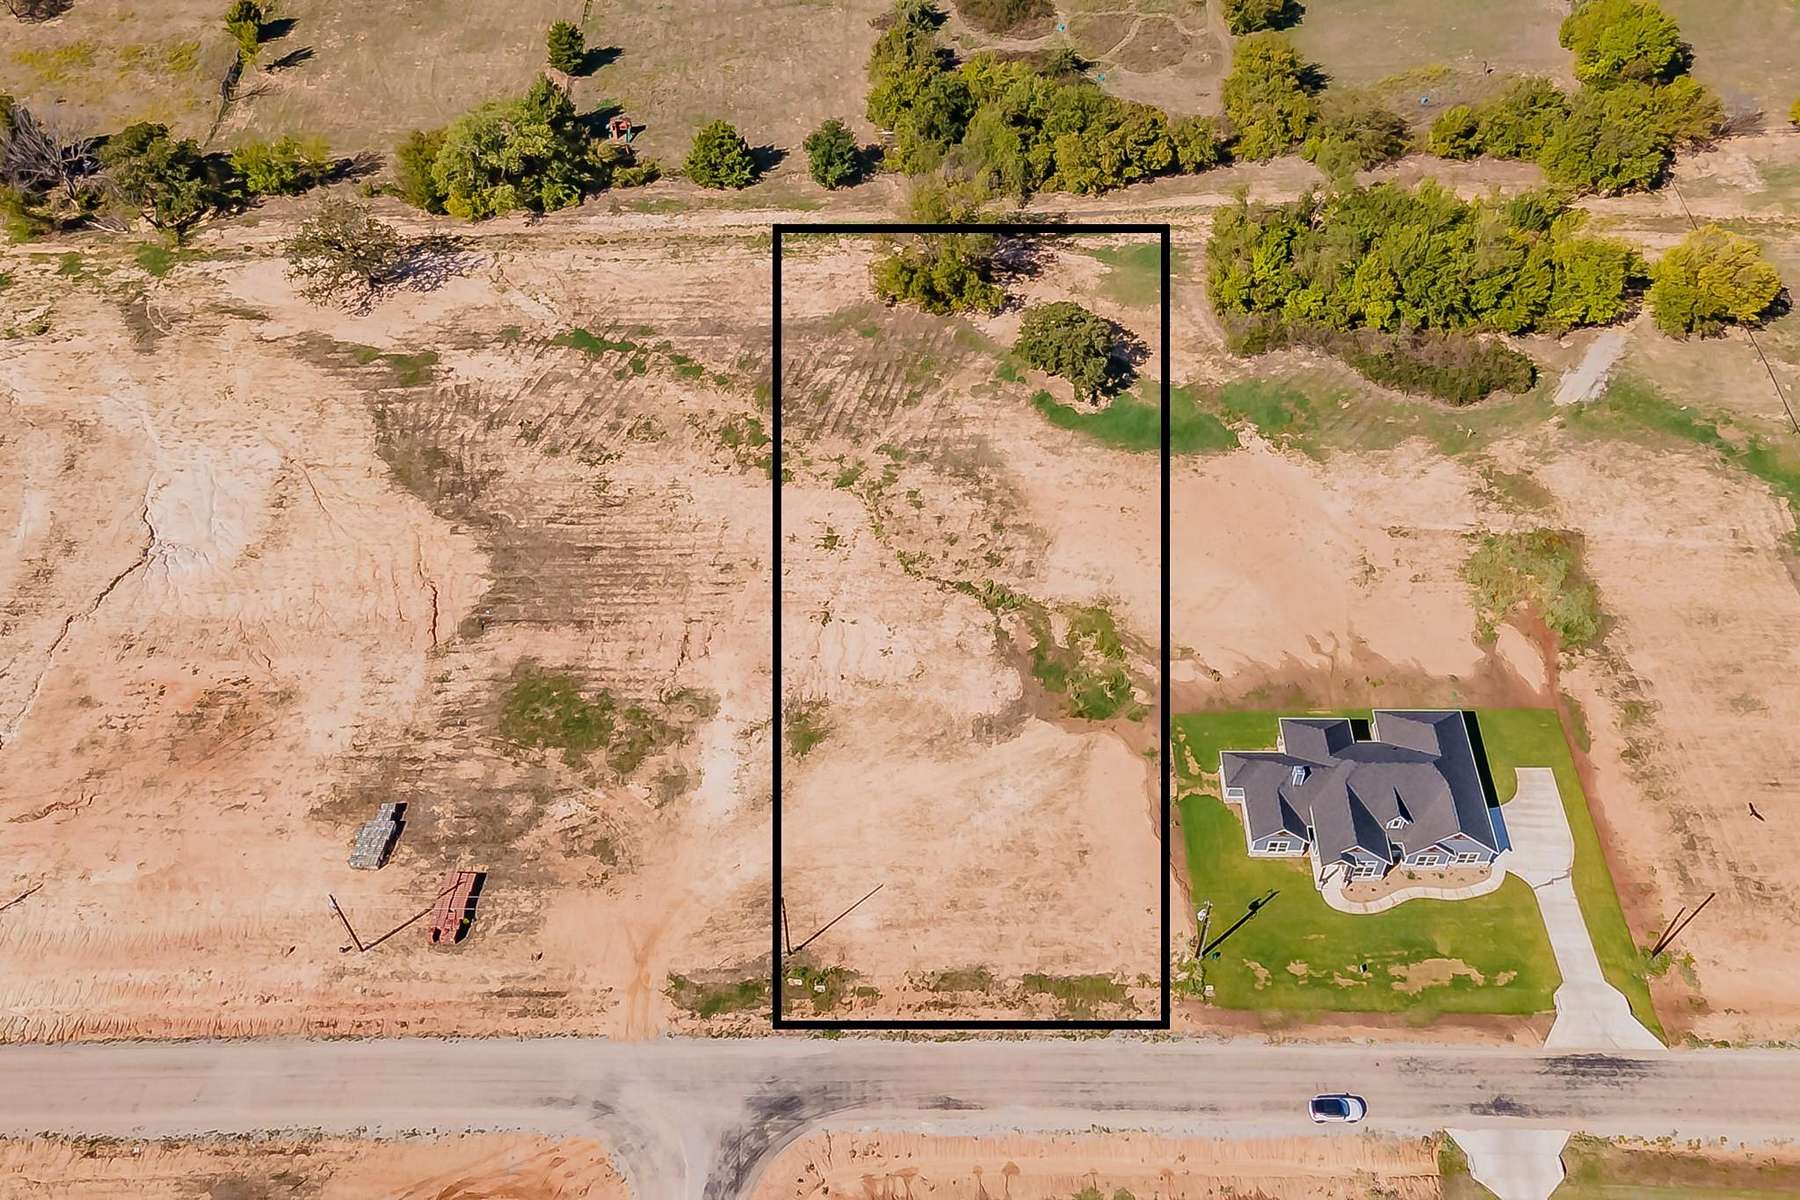 1.3 Acres of Residential Land for Sale in Springtown, Texas